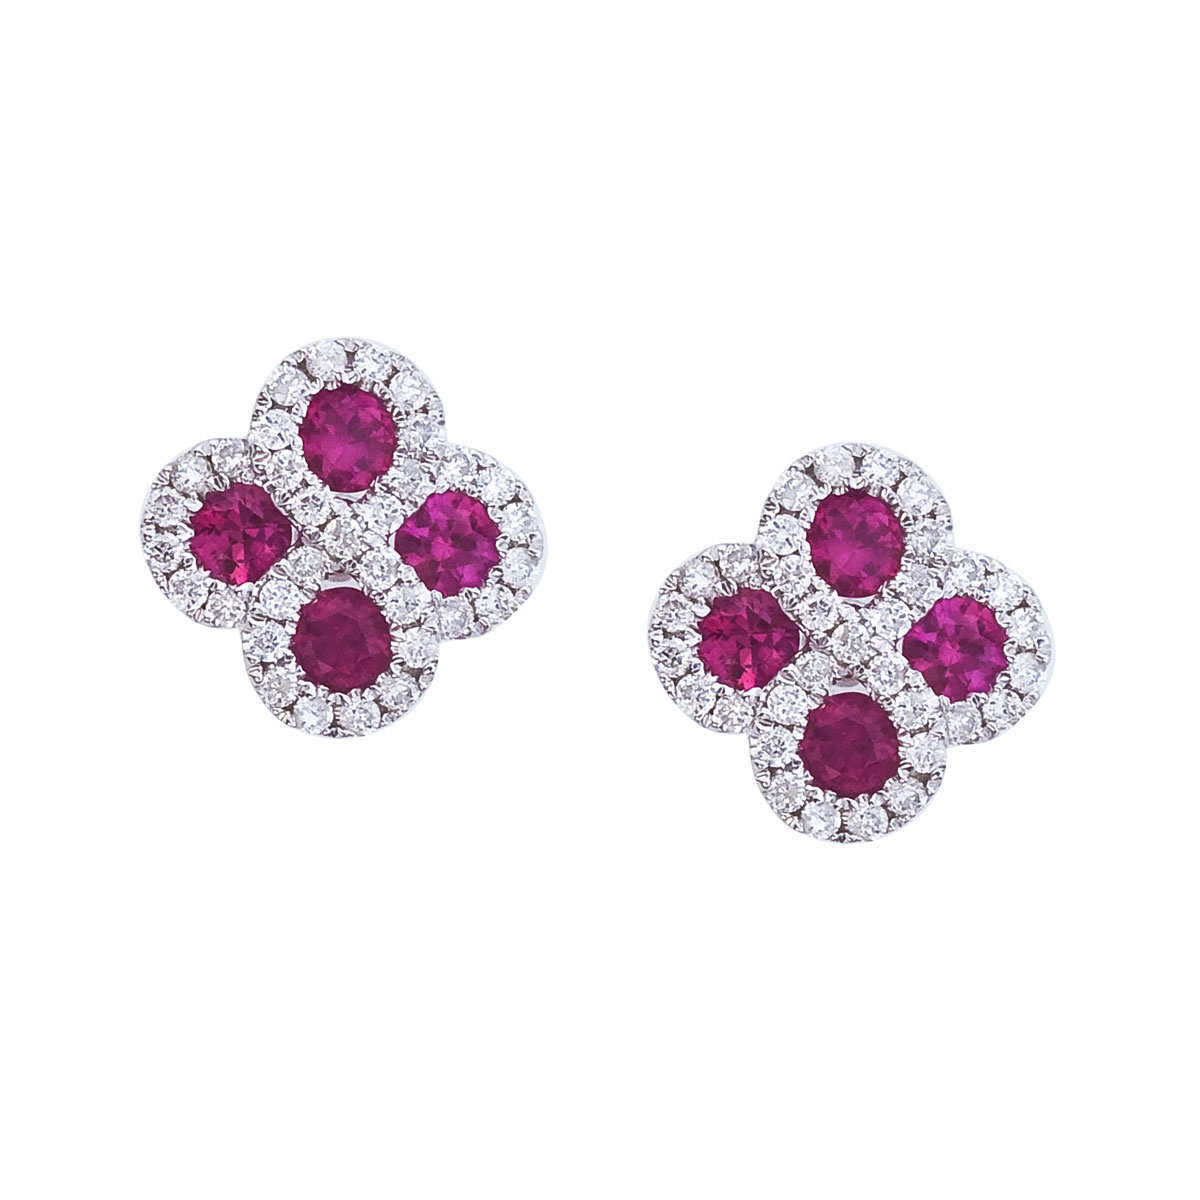 JCX2092: Beautiful clover shaped earrings with 2.7 mm rubies surrounded by gleaming diamonds.